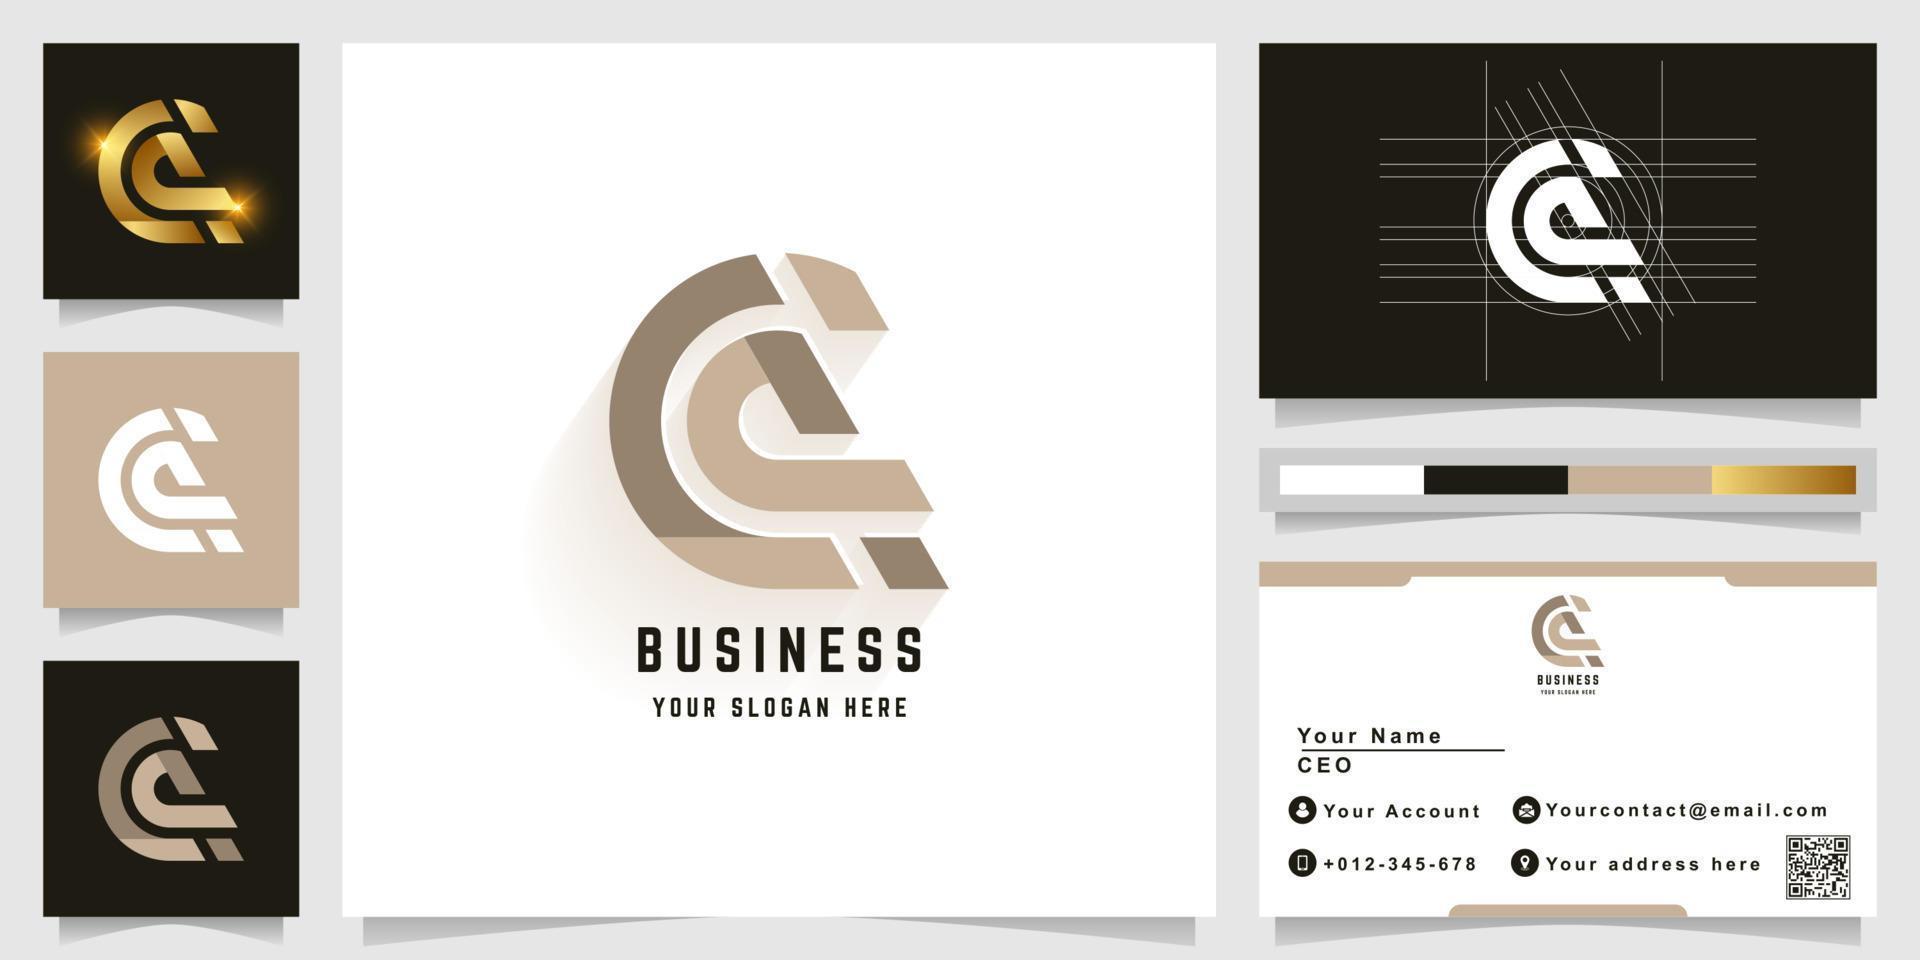 Letter a or Cq monogram logo with business card design vector